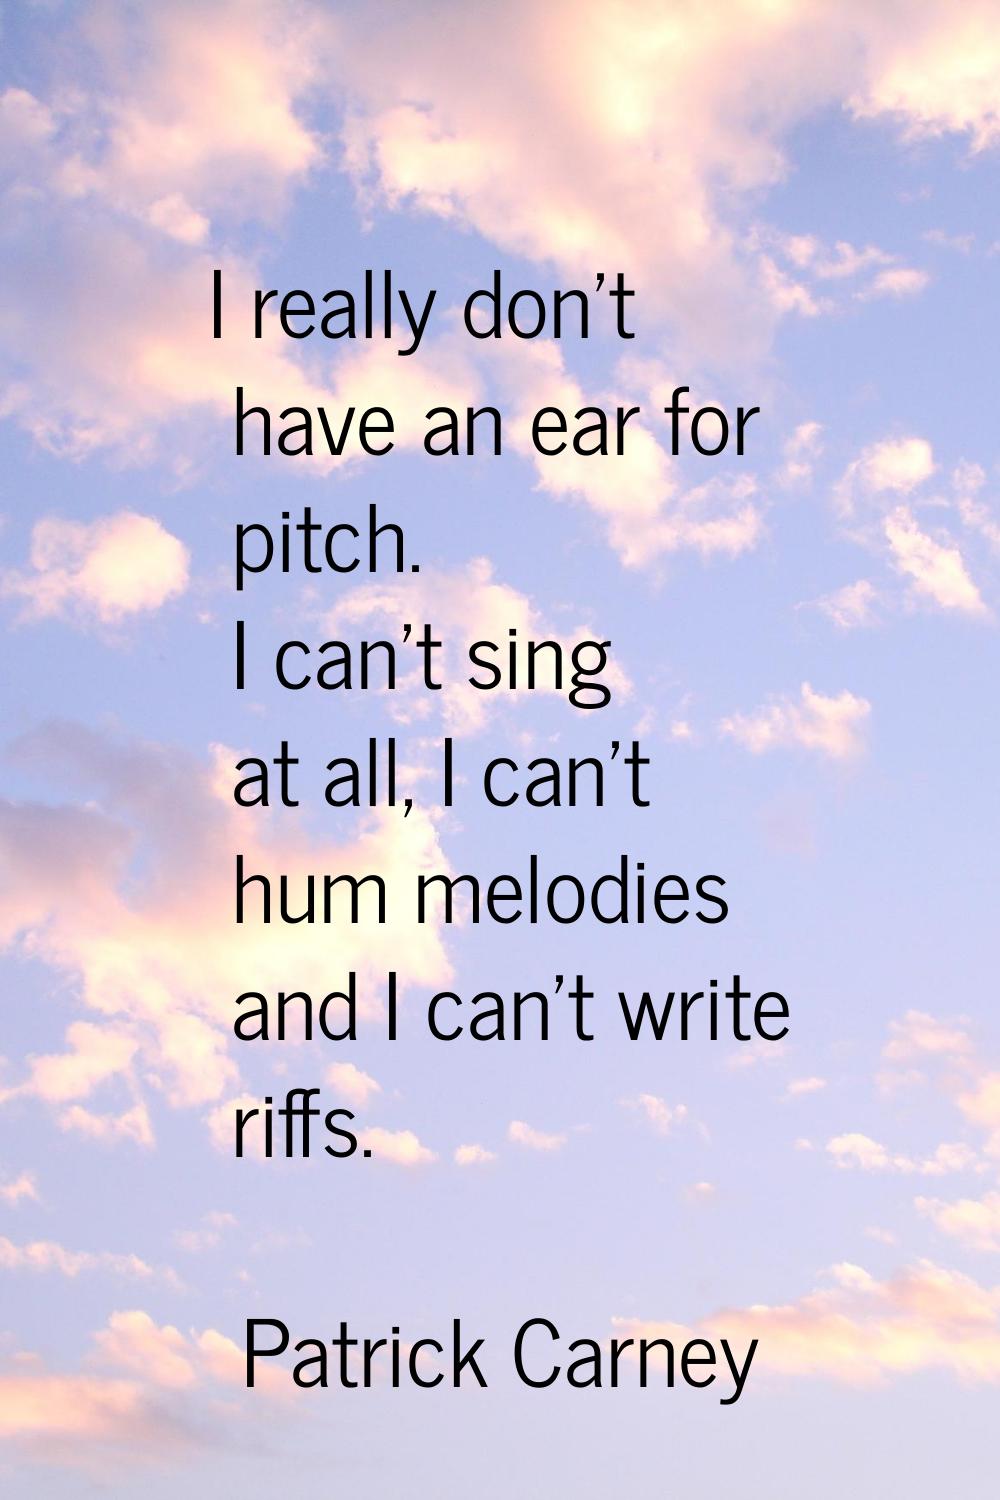 I really don't have an ear for pitch. I can't sing at all, I can't hum melodies and I can't write r